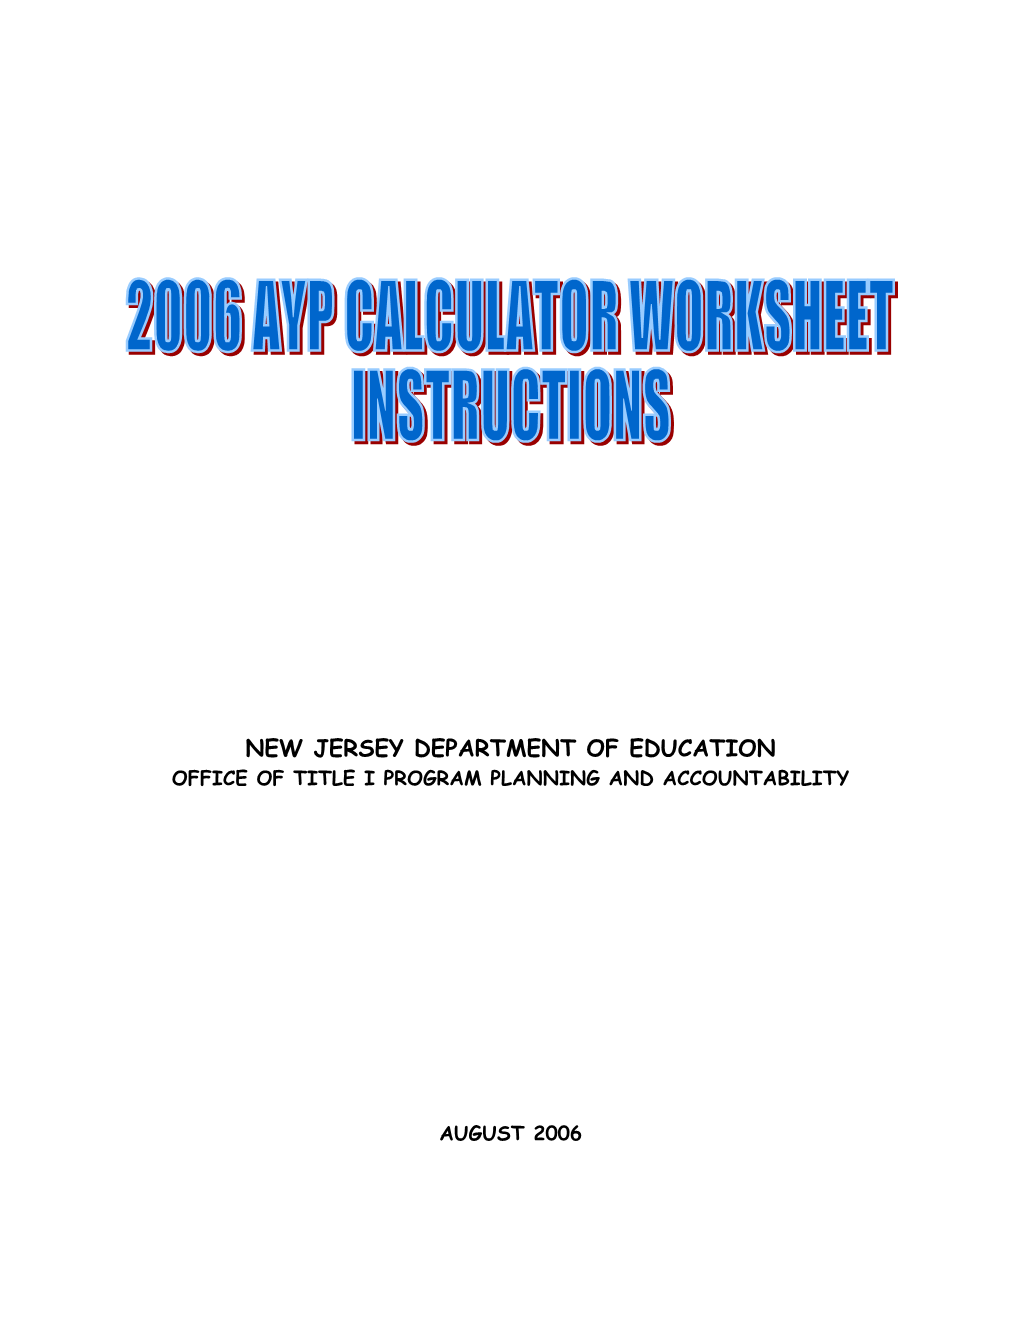 Instructions for Using Ayp Calculator